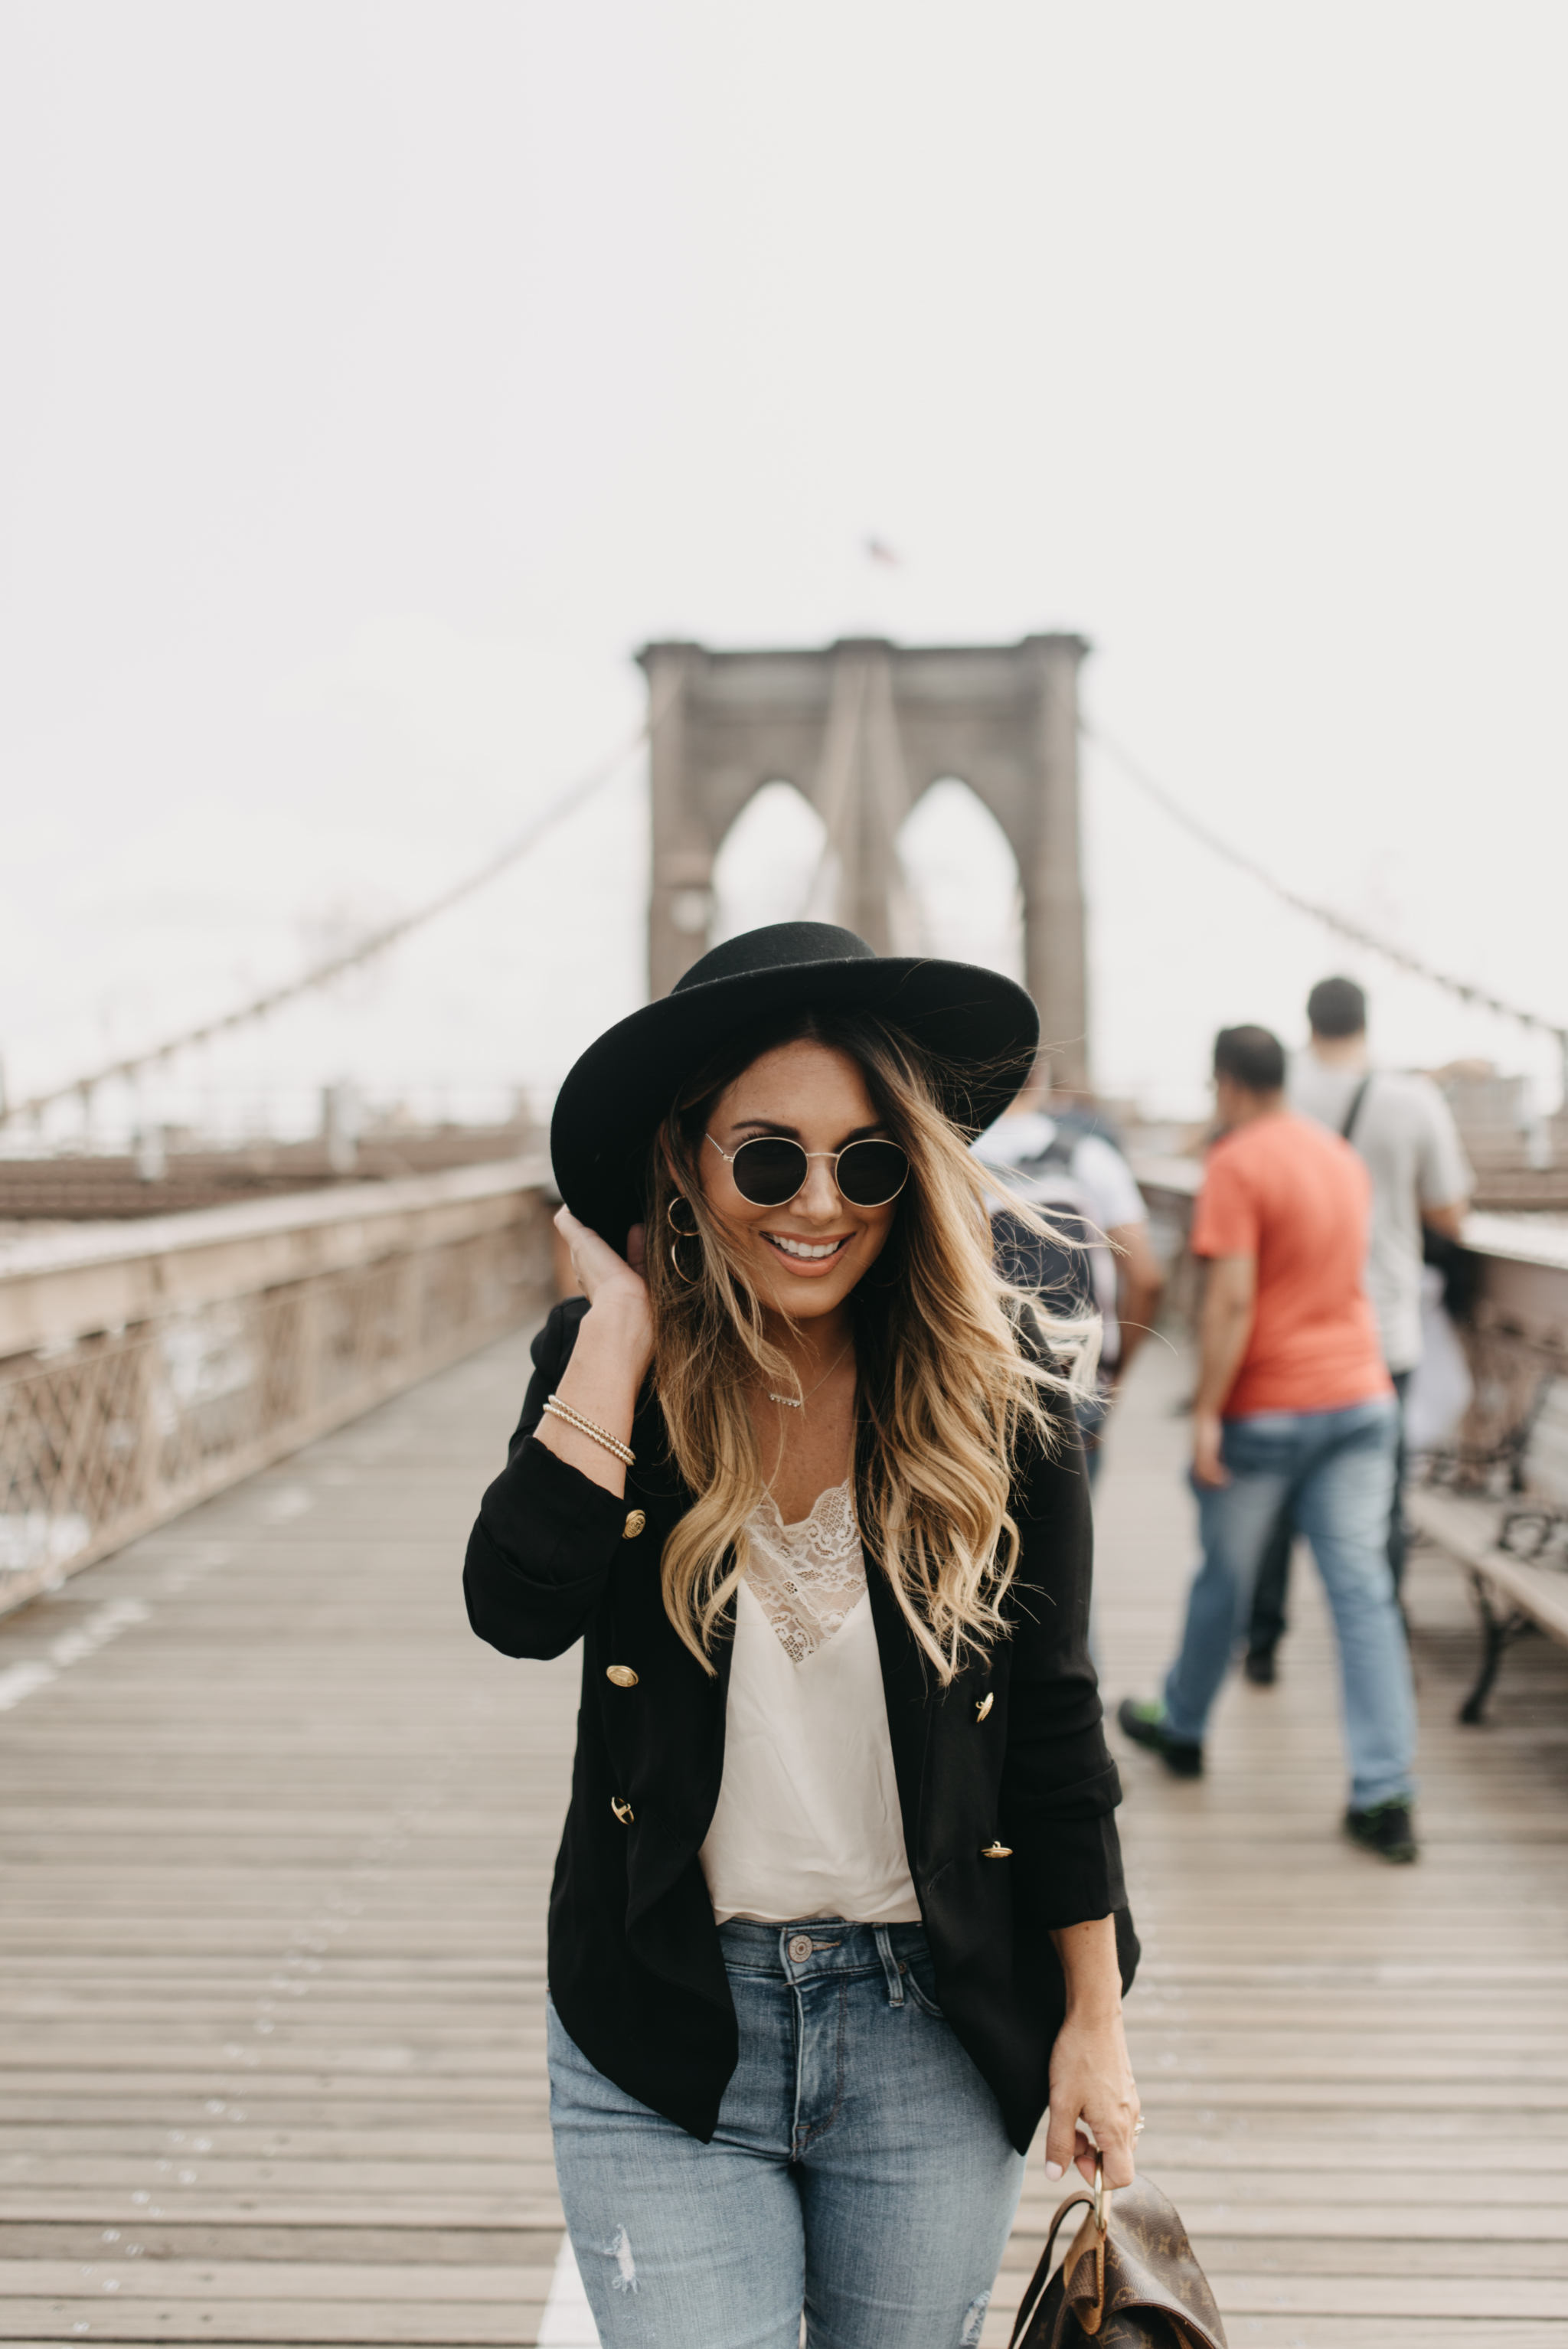 THE BEST BOATER HAT FOR UNDER $35. TRENDY YET AFFORDABLE HATS AT ASOS.